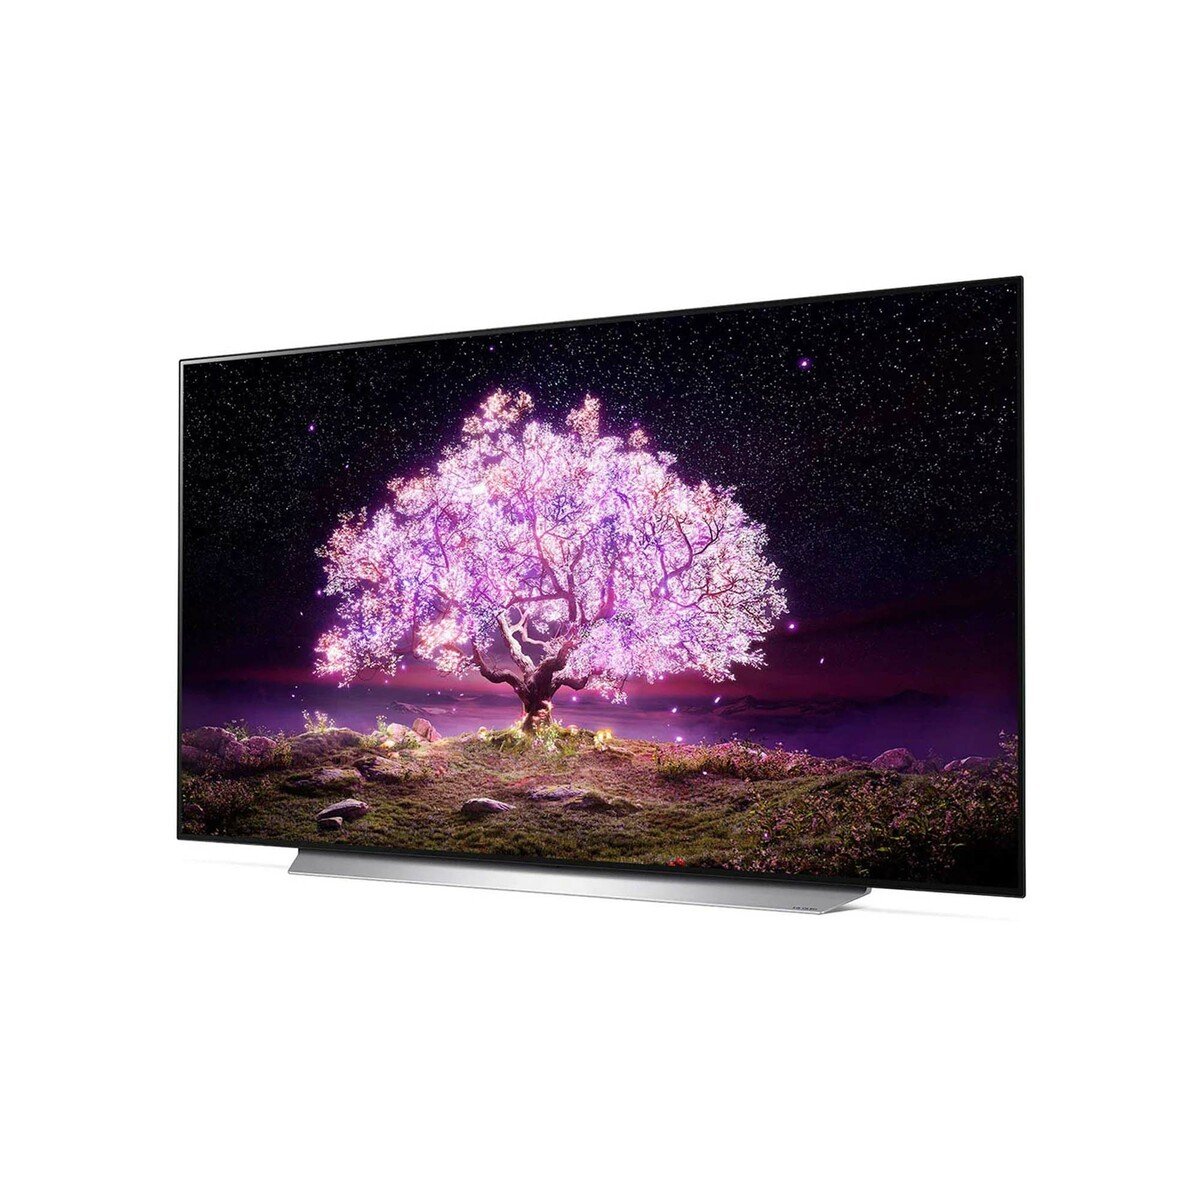 LG OLED TV 77 Inch C1 Series New 2021 Cinema Screen Design 4K Cinema HDR webOS Smart with ThinQ AI Pixel Dimming